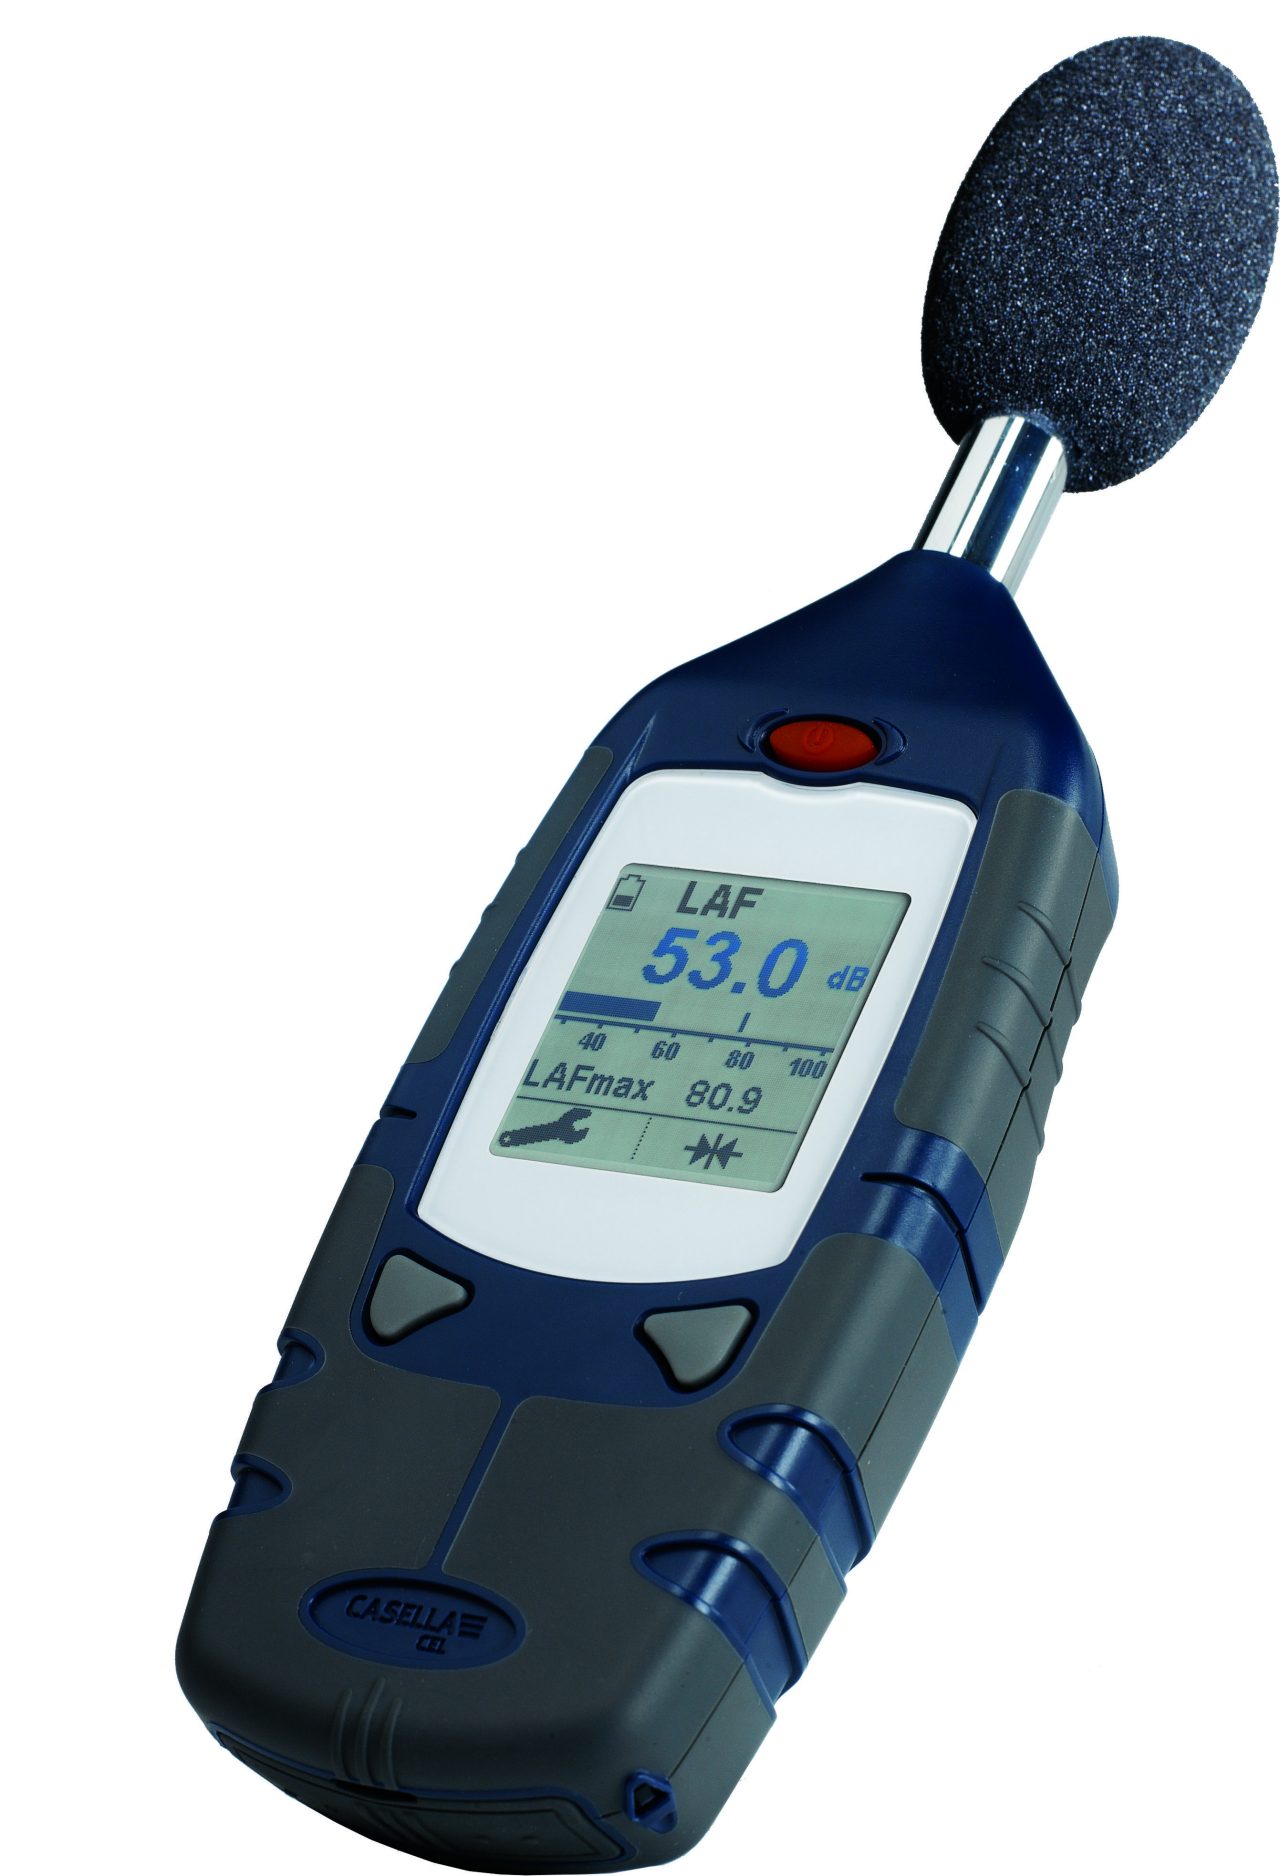 Casella's CEL-240 is easy to use designed to undertake noise measurements at work for a variety of applications. Giving real-time, recorded history ensuring the highest levels of accuracy and performance, all housed in a rugged and compact design.